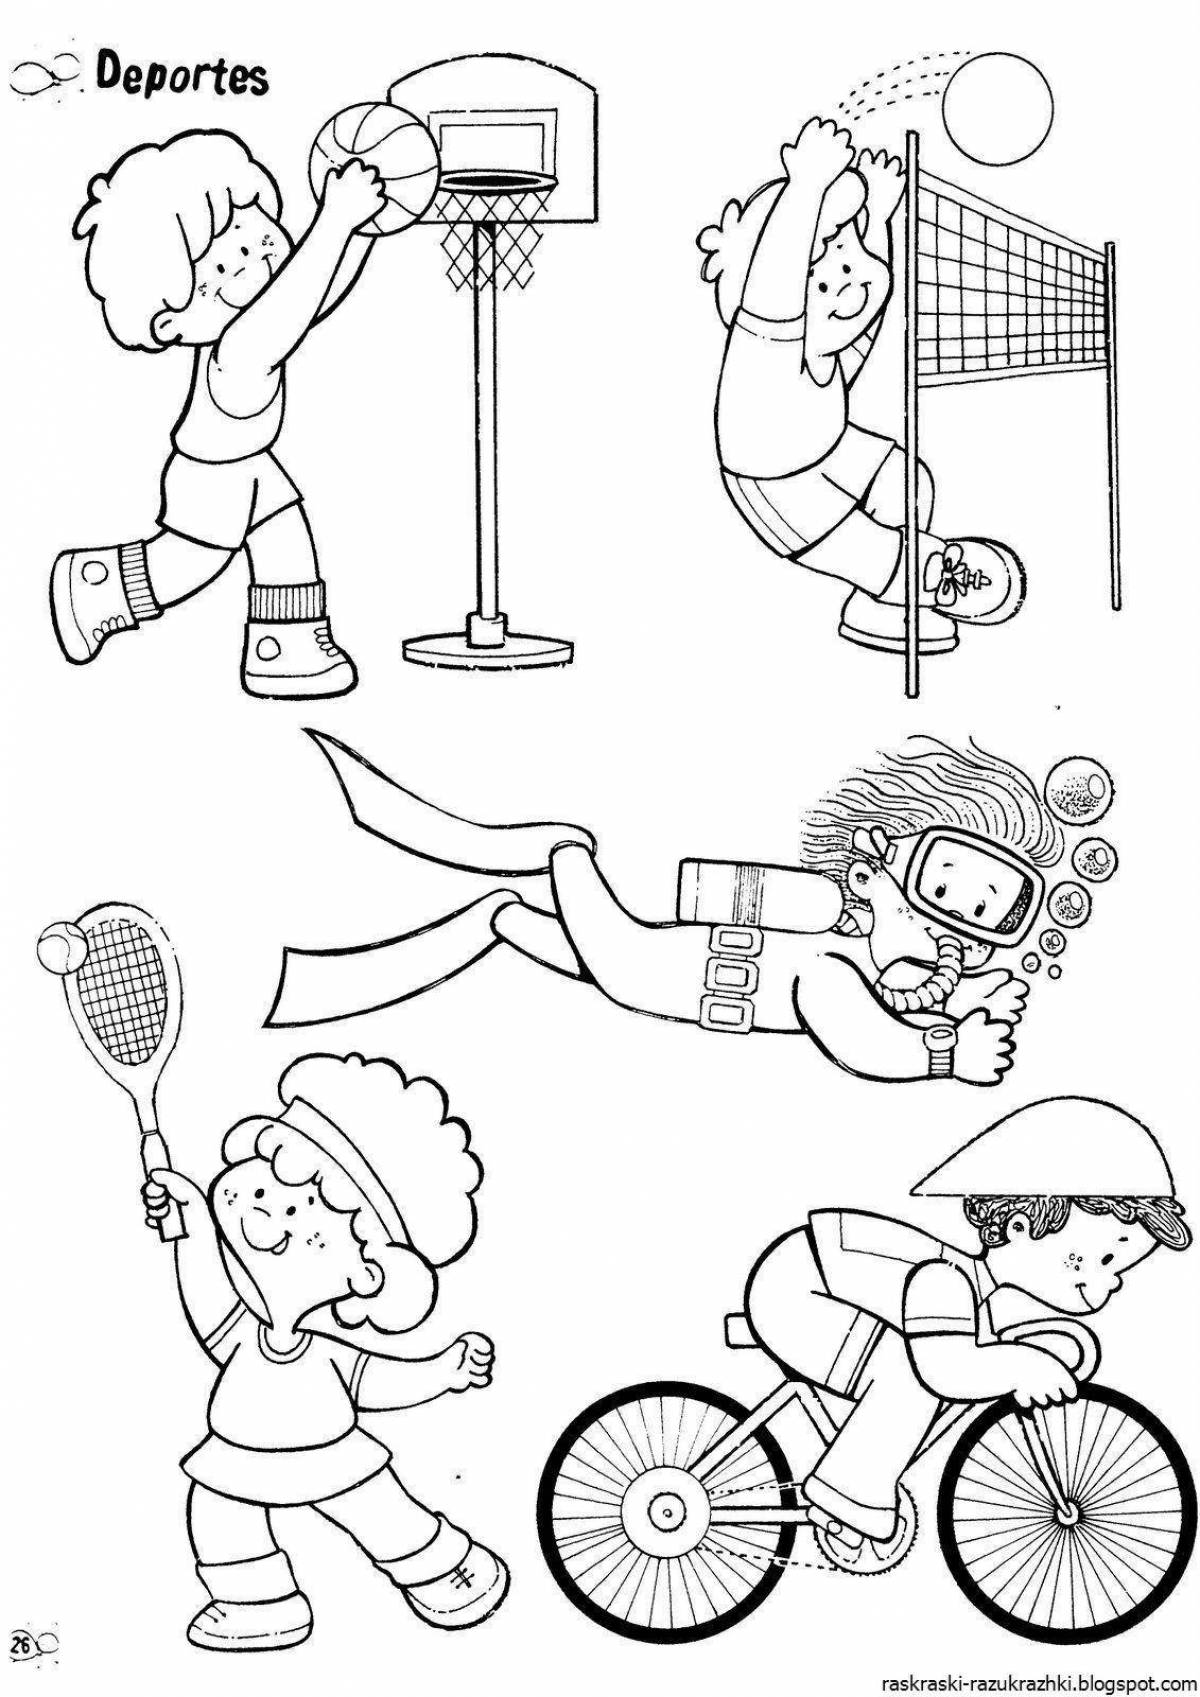 About sports and a healthy lifestyle for children #9